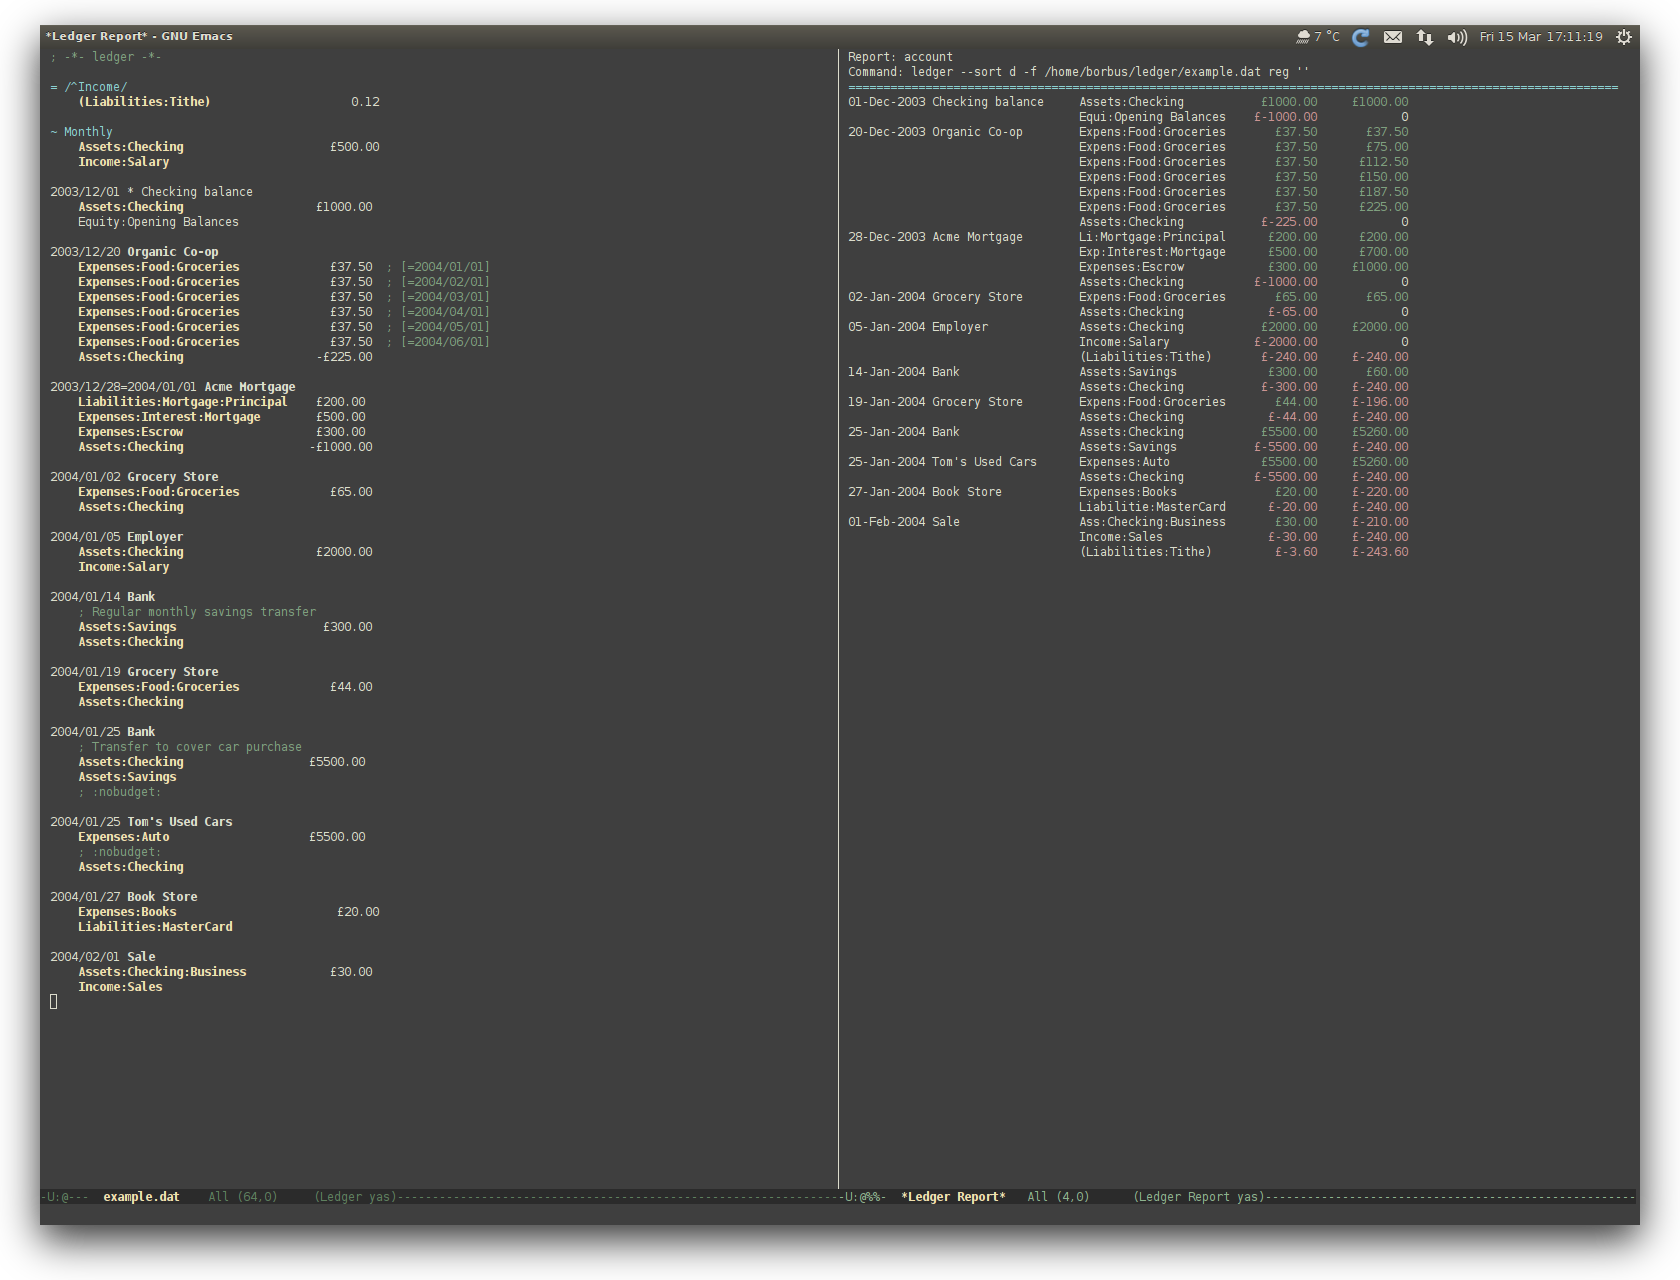 /TakeV/spacemacs/media/commit/aa64092dc9bdb6c5657c0eed558a8e65870f3193/layers/finance/img/ledger.png